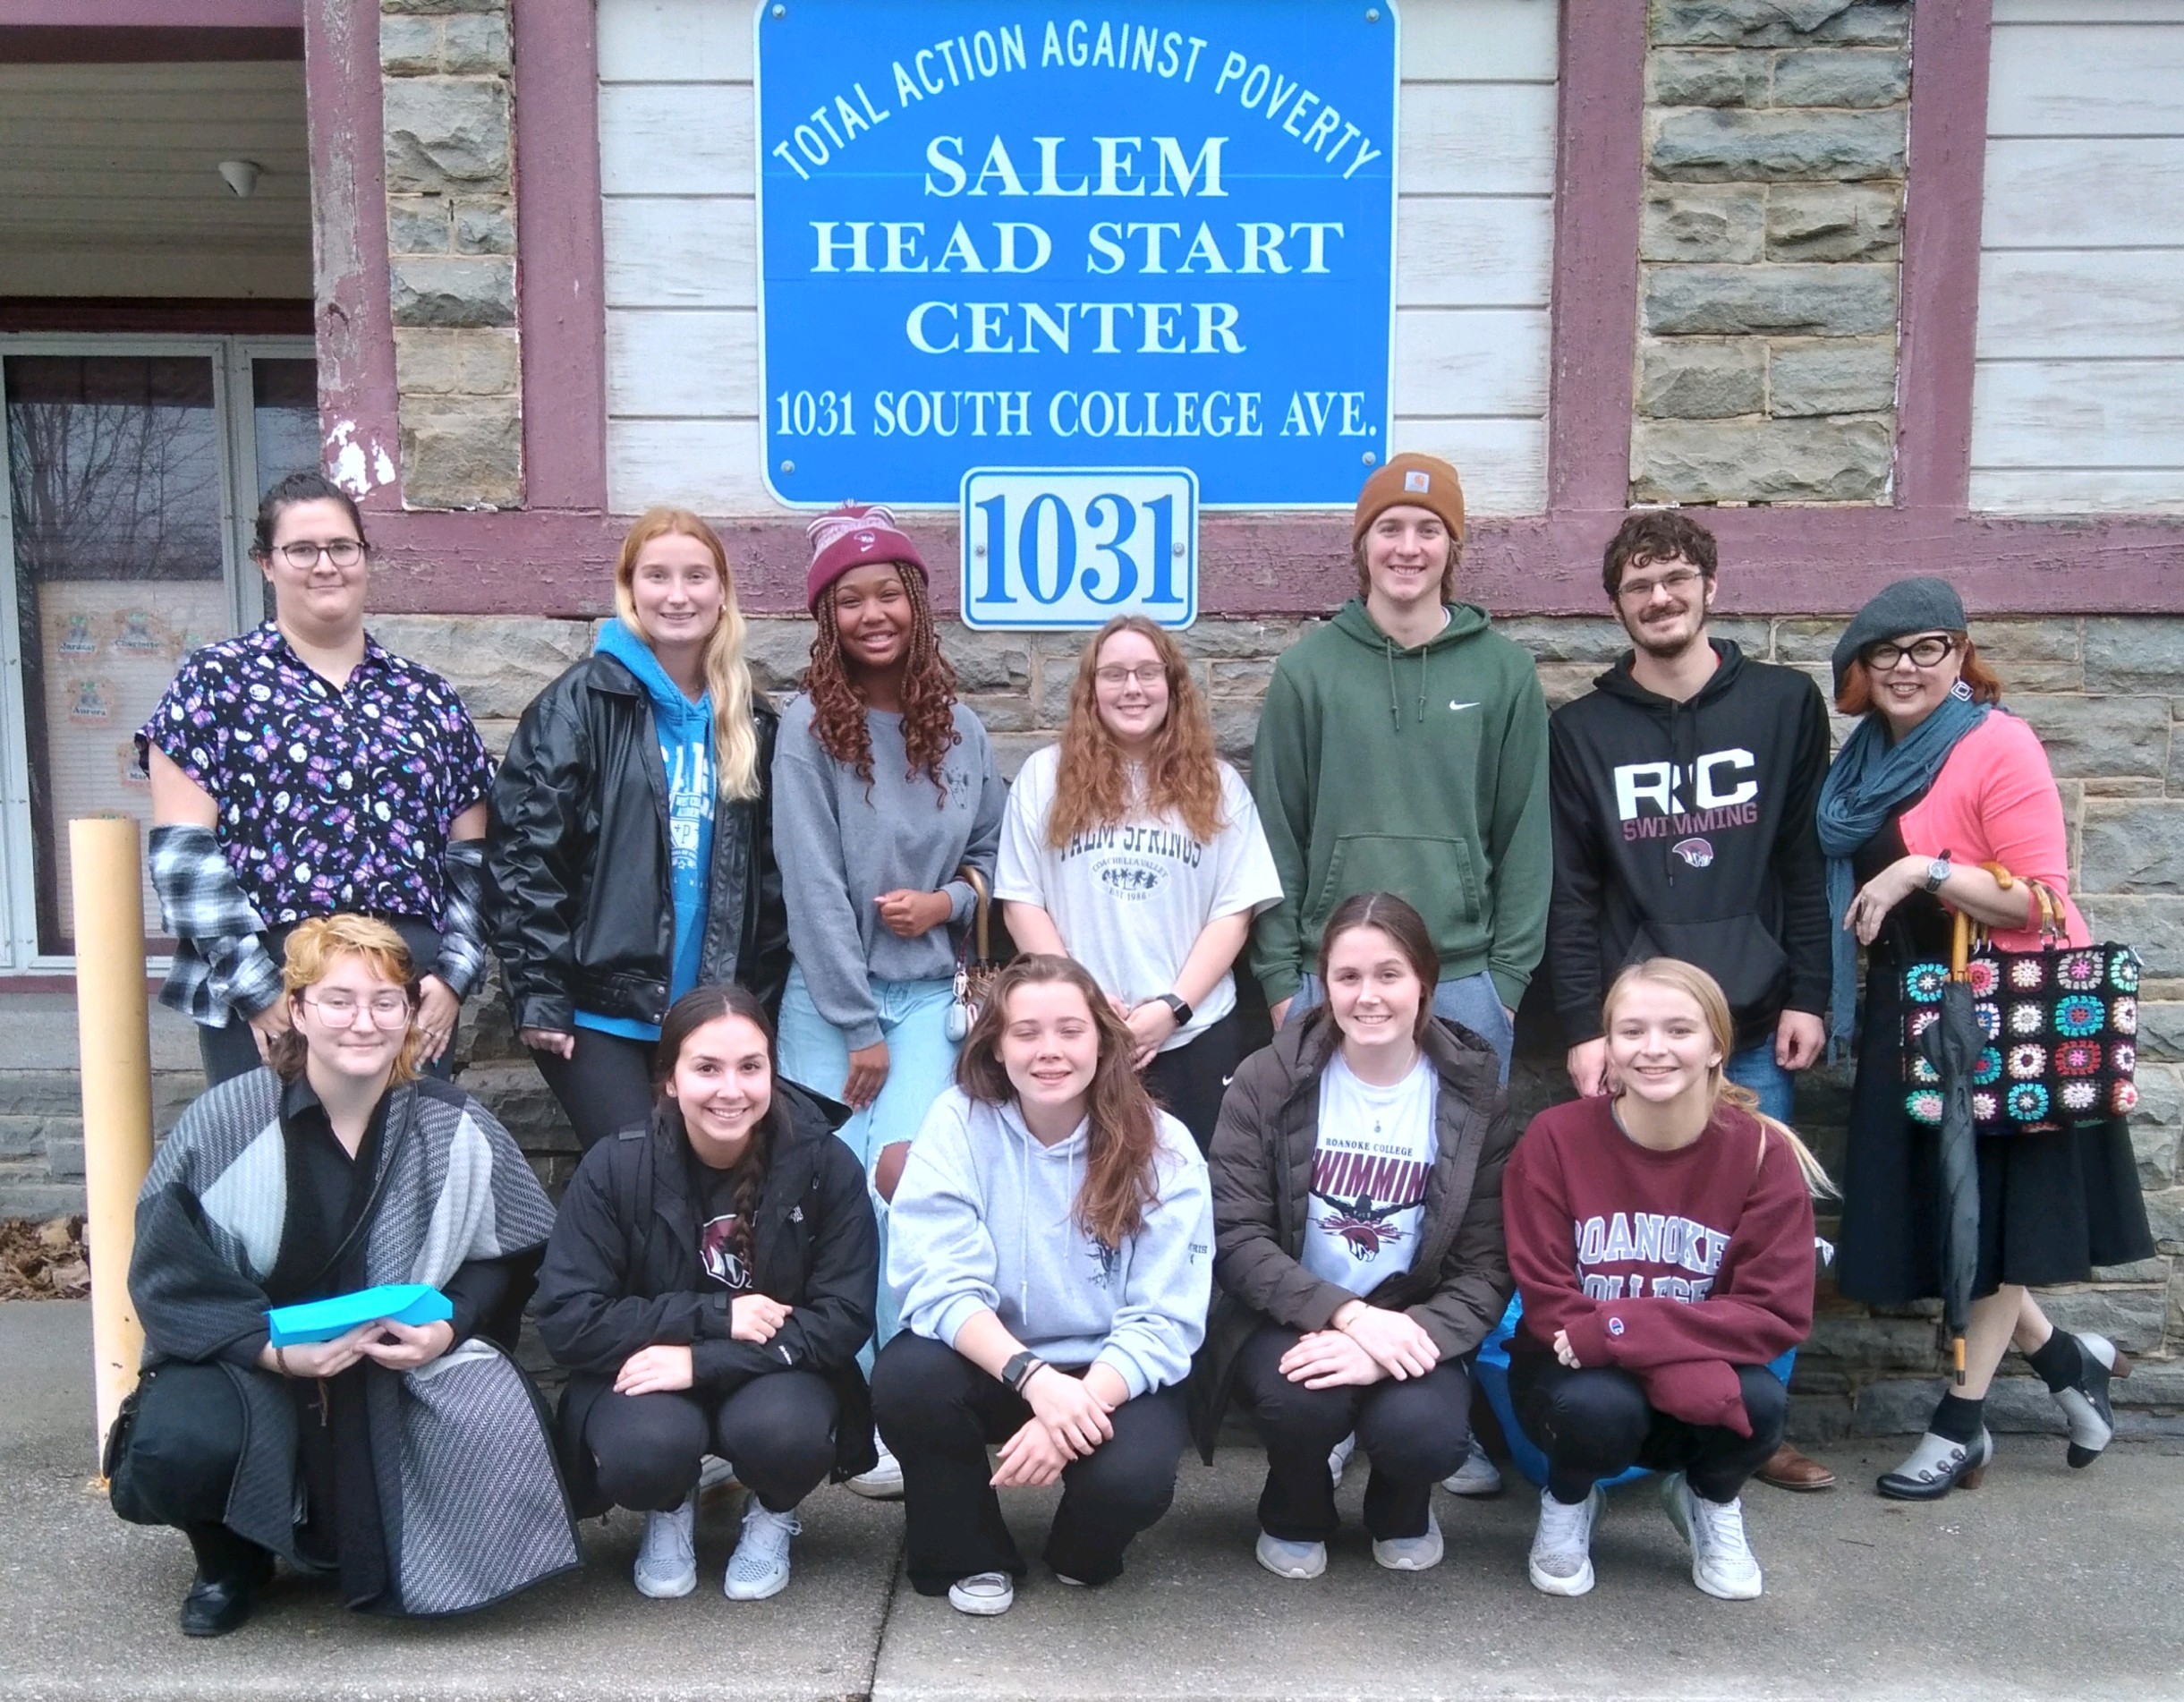 Students stand outside the Salem Head Start Center